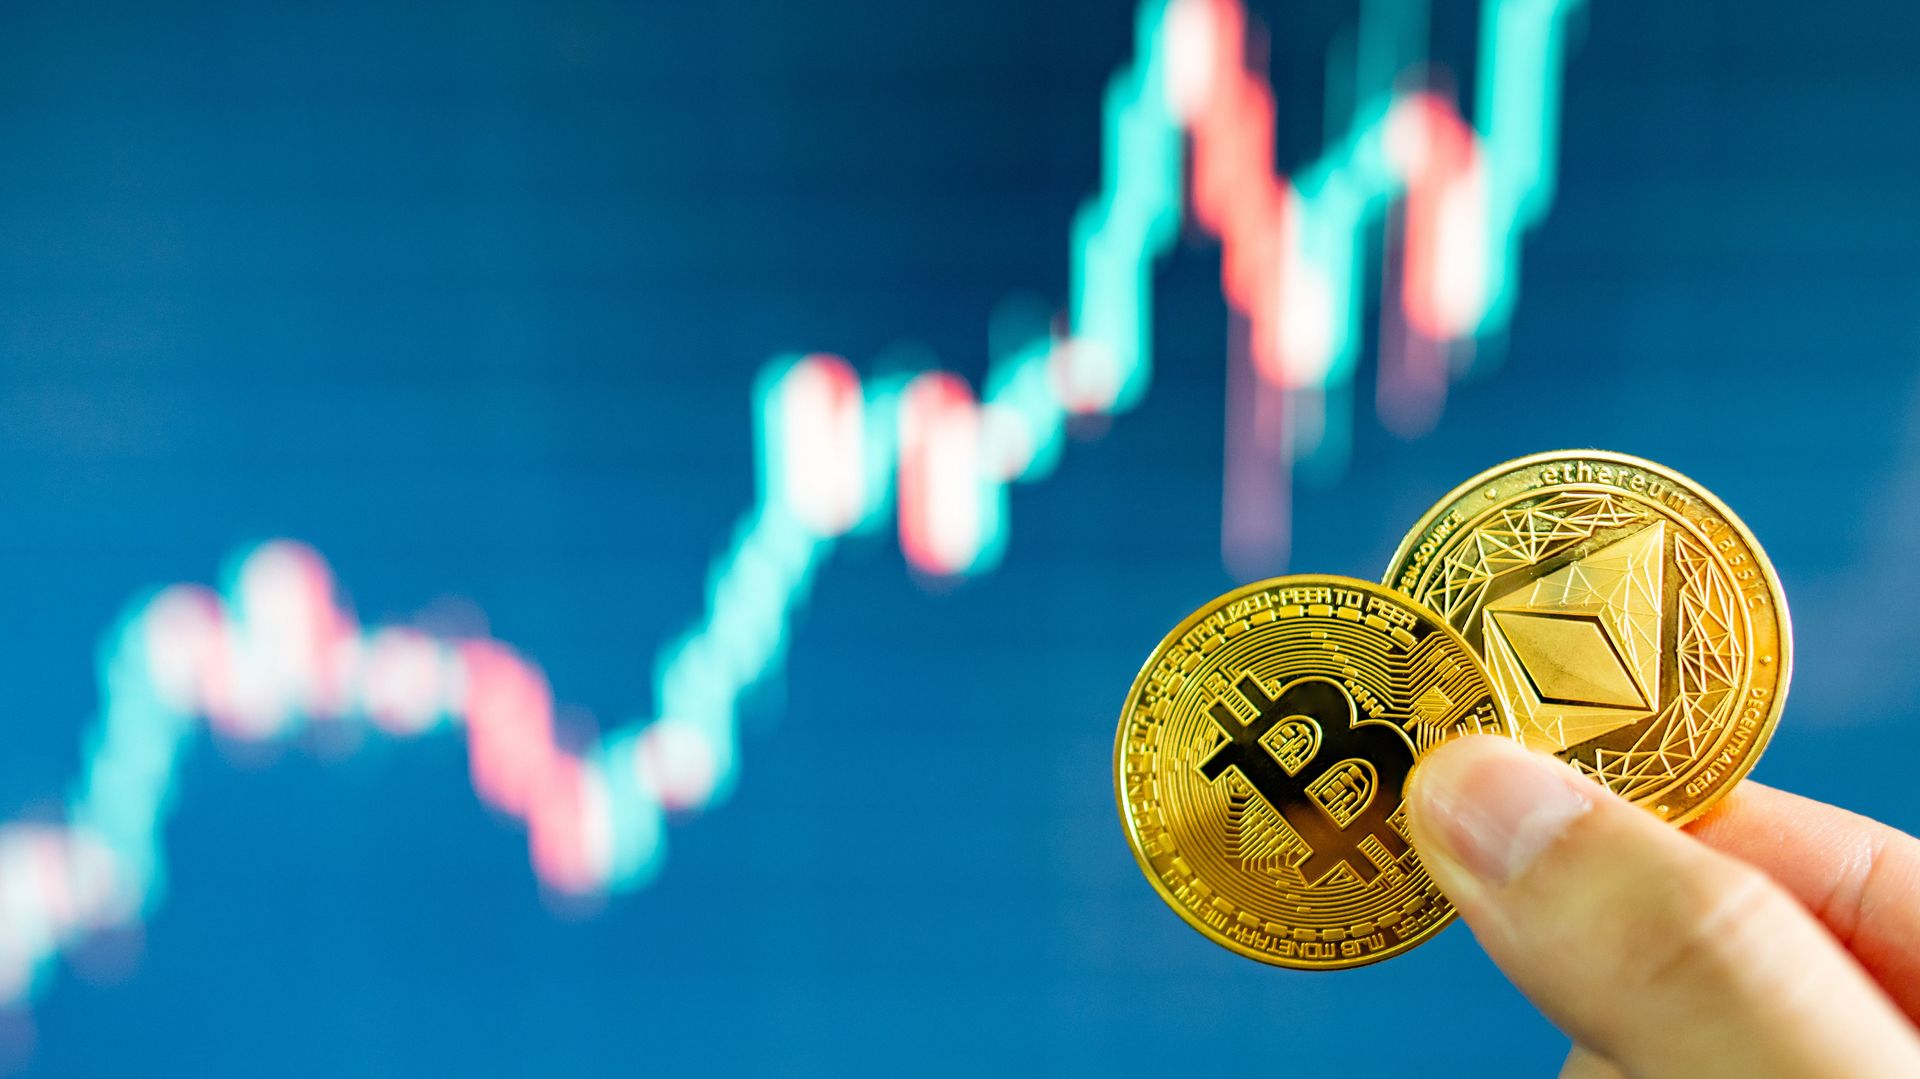 Bitcoin surges above $48k, Ether reclaims $2,500 as the crypto bull market heats up teaser image